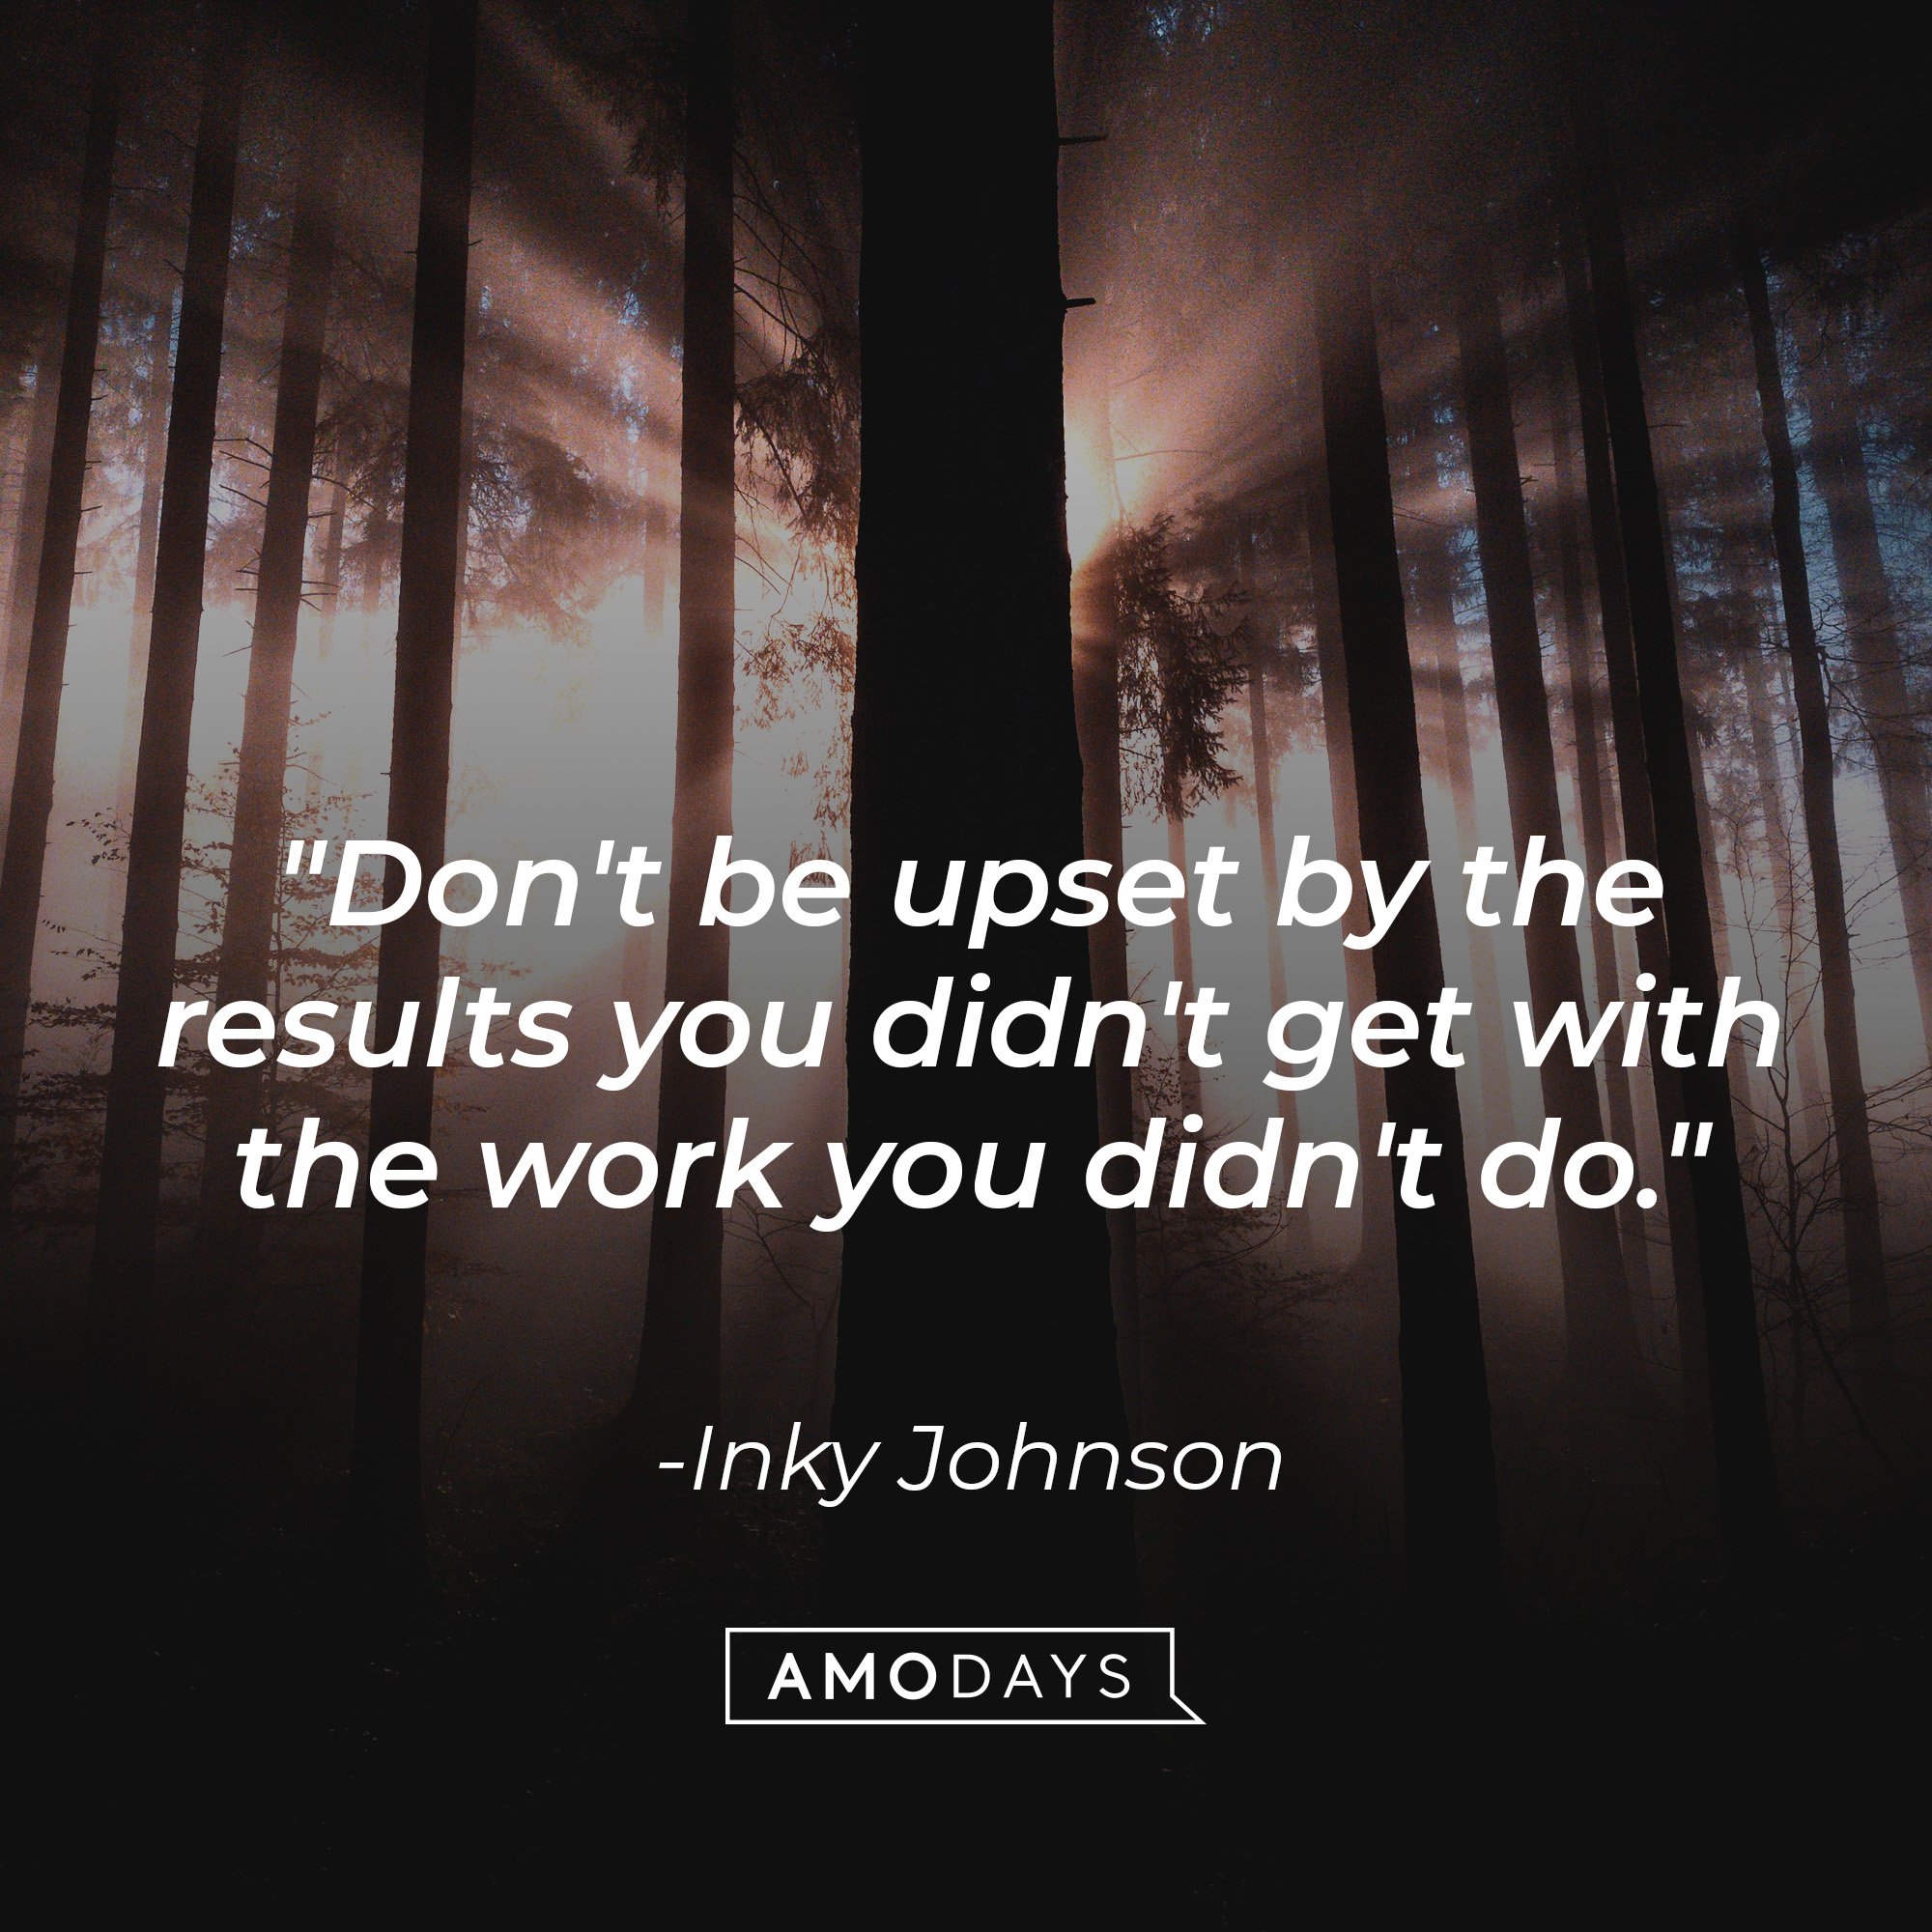 Inky Johnson's quote: "Don't be upset by the results you didn't get with the work you didn't do." | Image: AmoDays